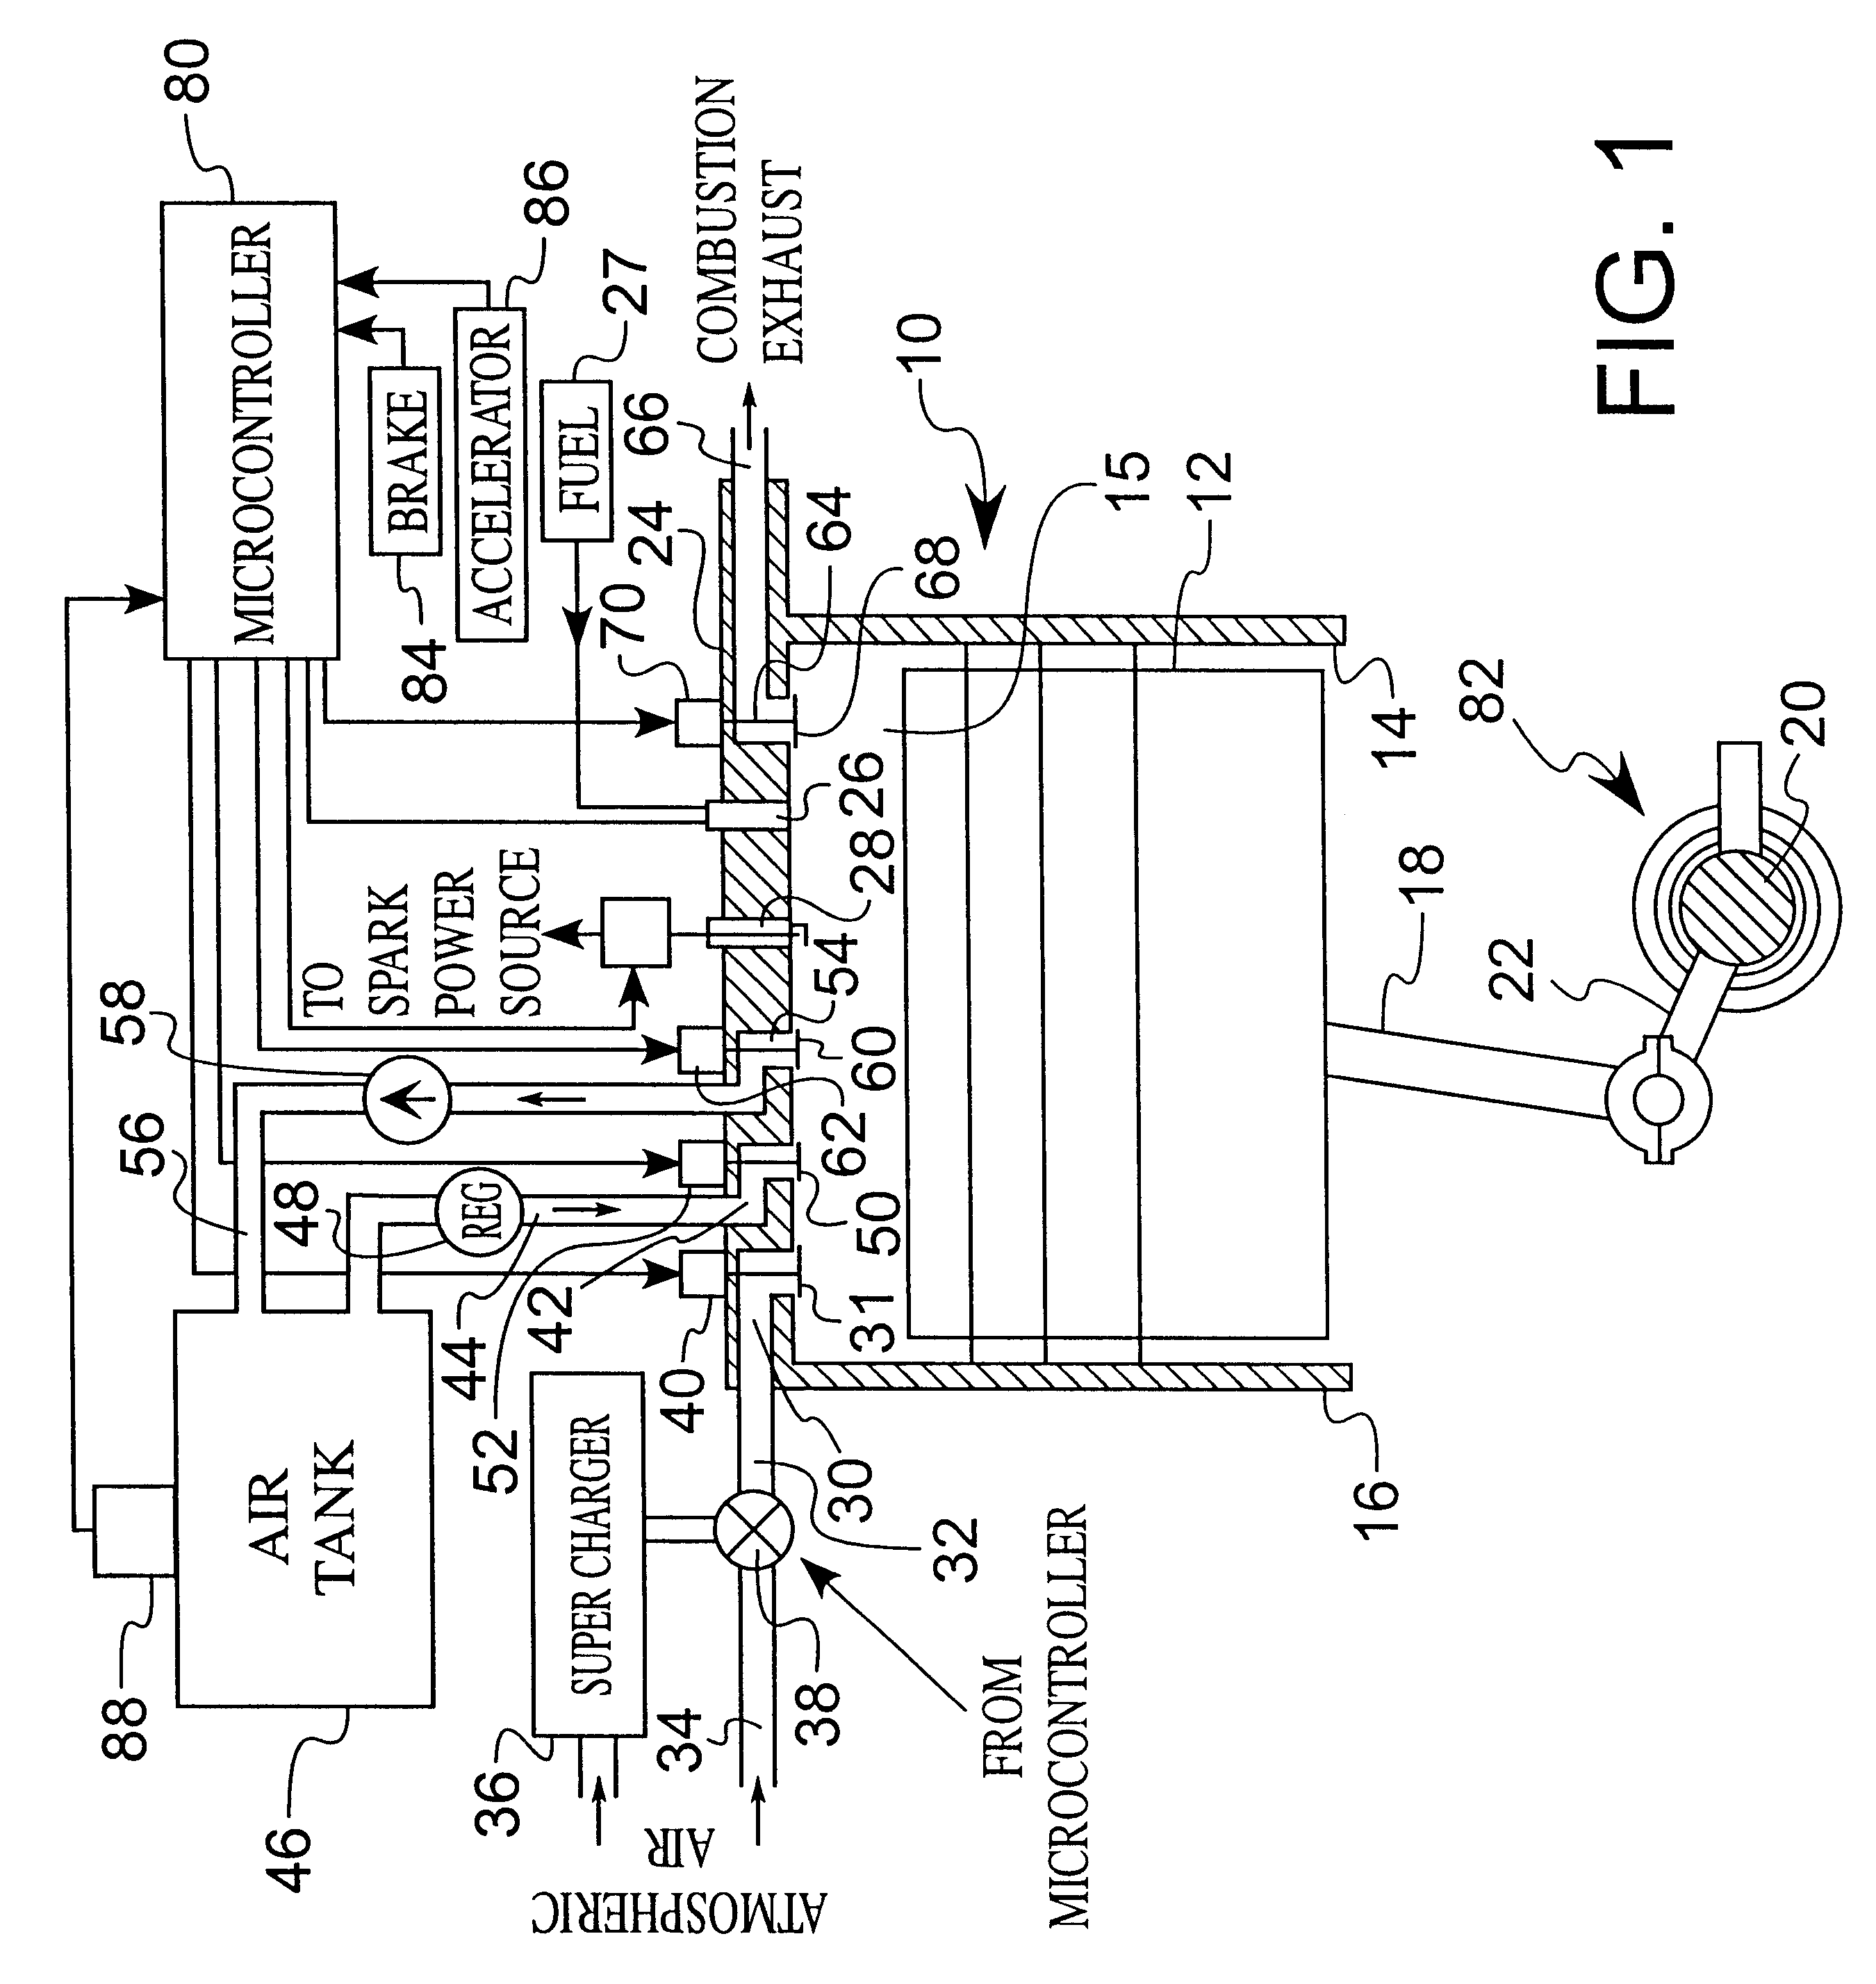 Hybrid expansible chamber engine with internal combustion and pneumatic modes